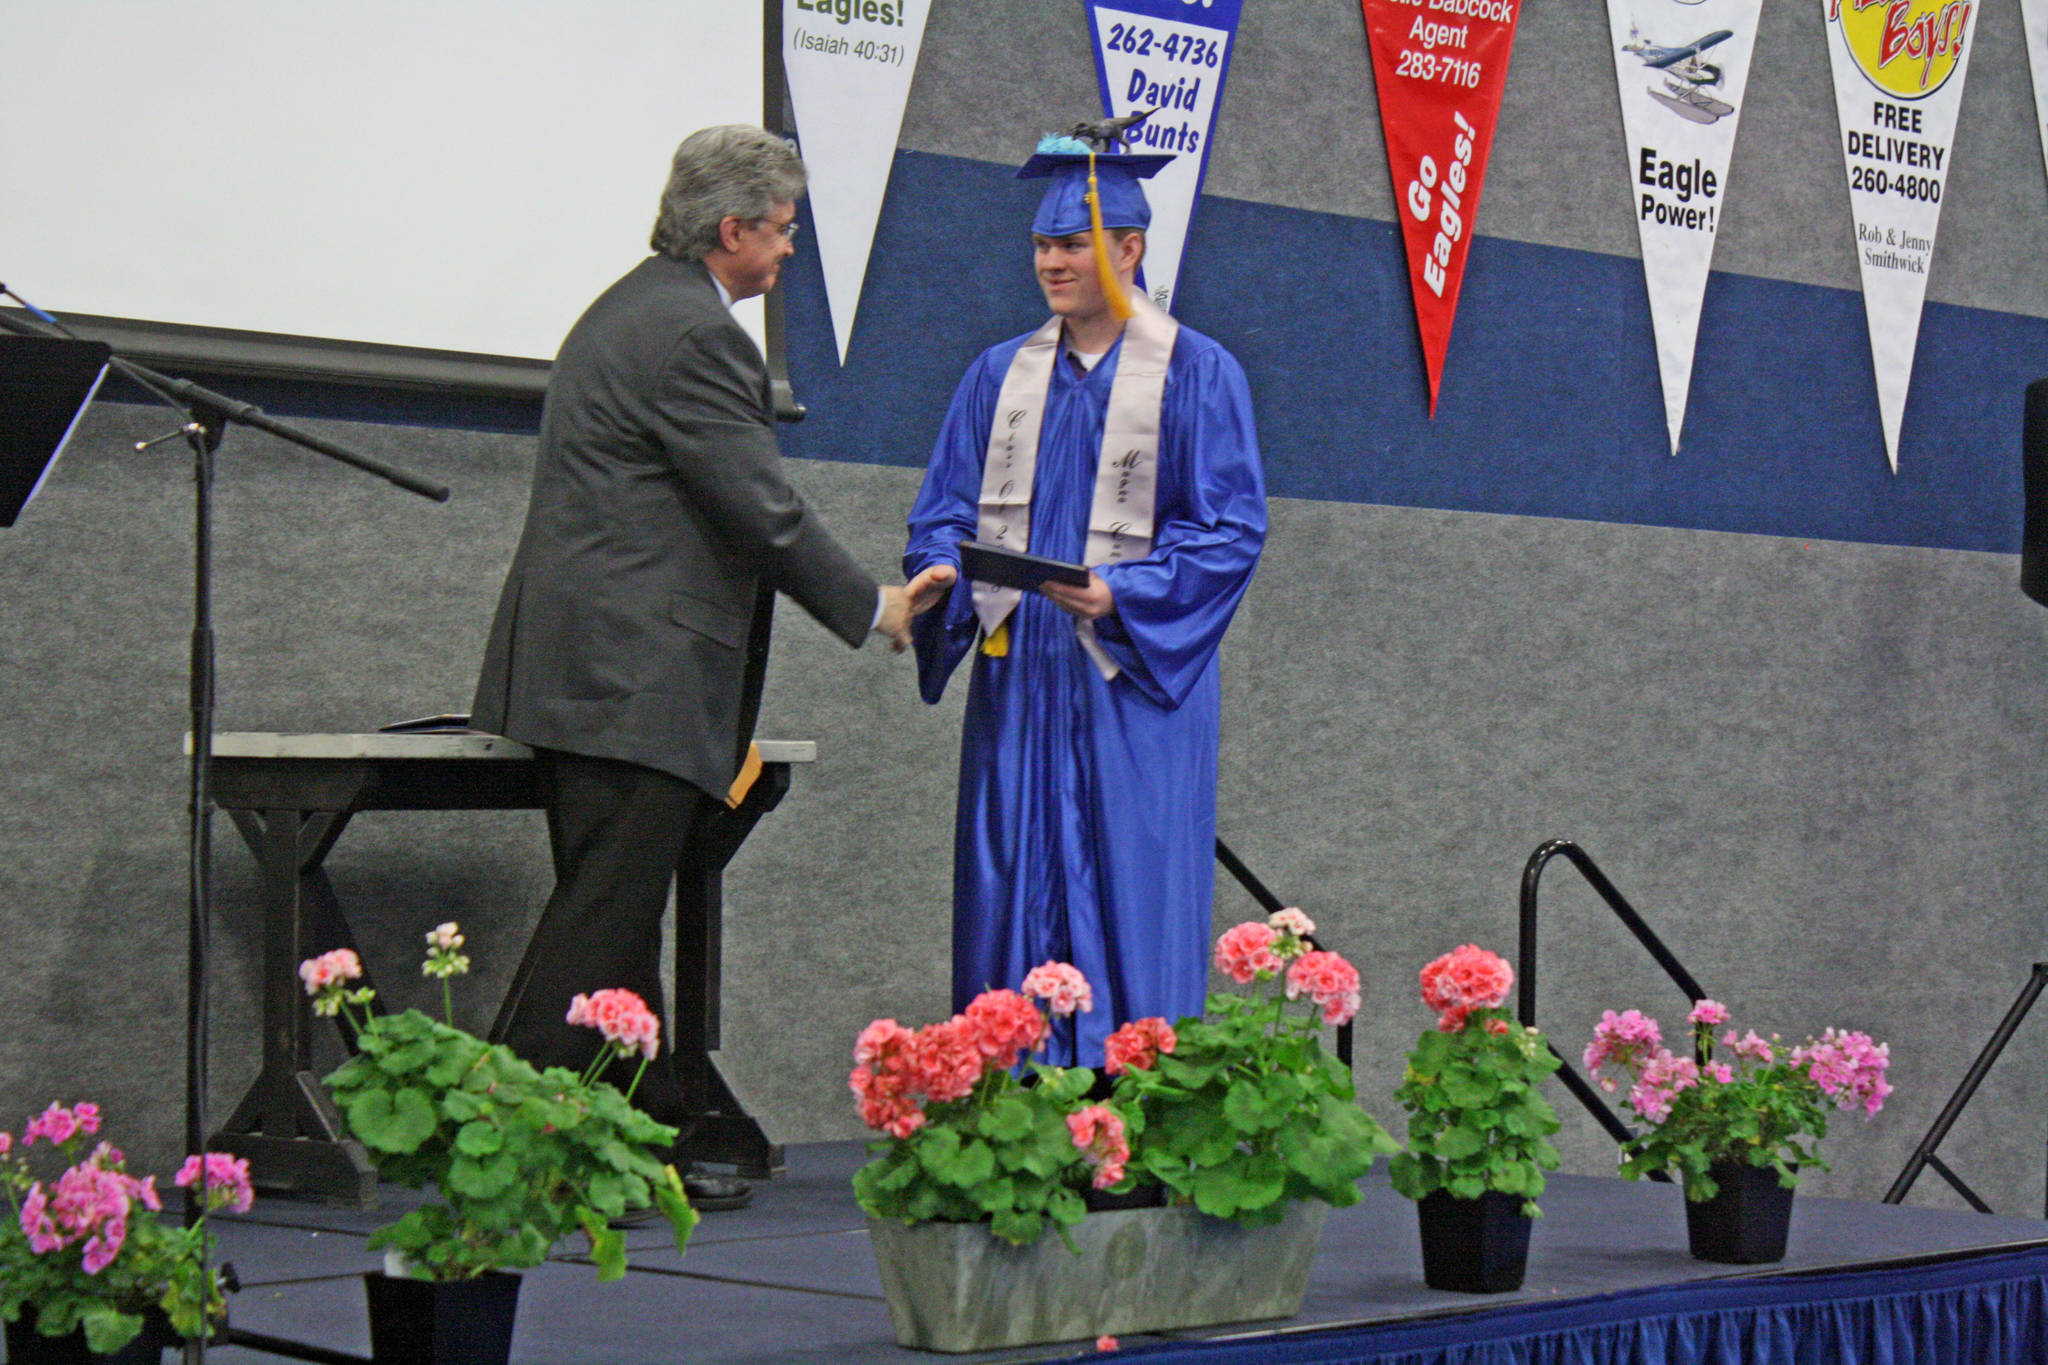 Gabriel Nicholas Bignell accepts his diploma from Cook Inlet Academy in Soldotna, Alaska, on Sunday, May 6. Bignell, who graduates magna cum laude, will attend University of Alaska Fairbanks in the fall and work to earn a degree in mechanical engineering. (Photo by Erin Thompson/Peninsula Clarion)